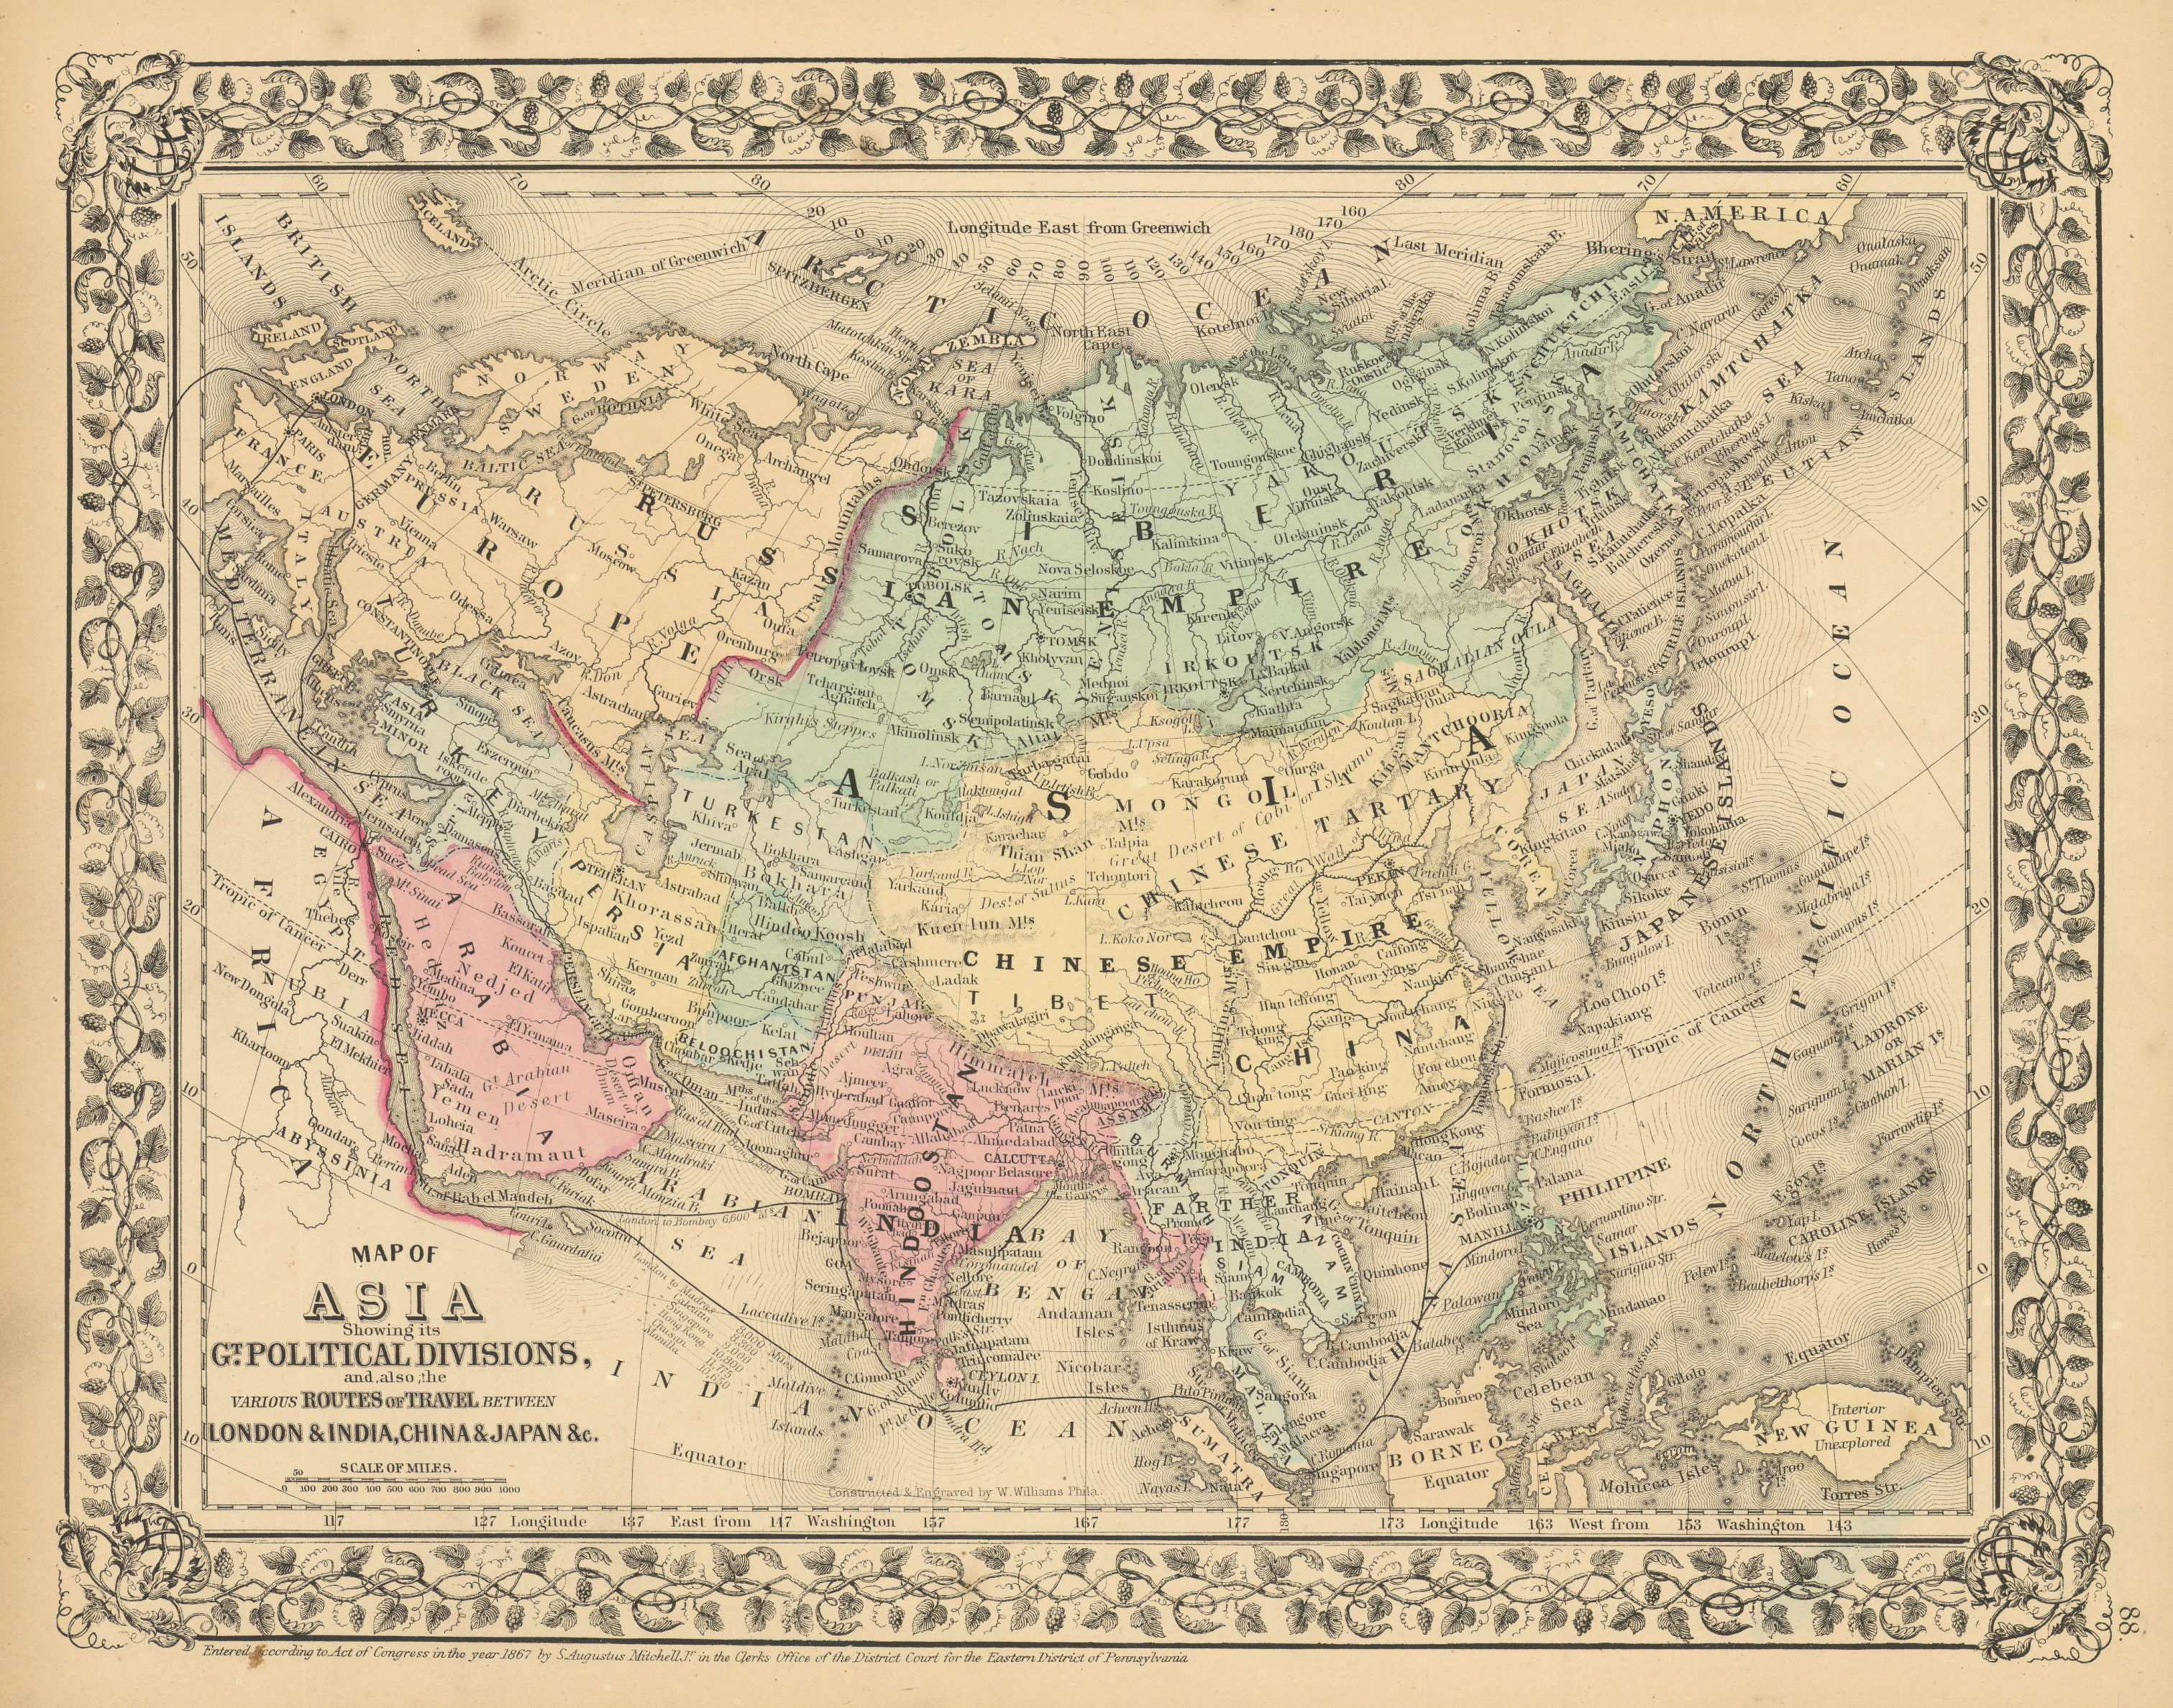 Asia showing… routes of travel between London & India, China… MITCHELL 1869 map